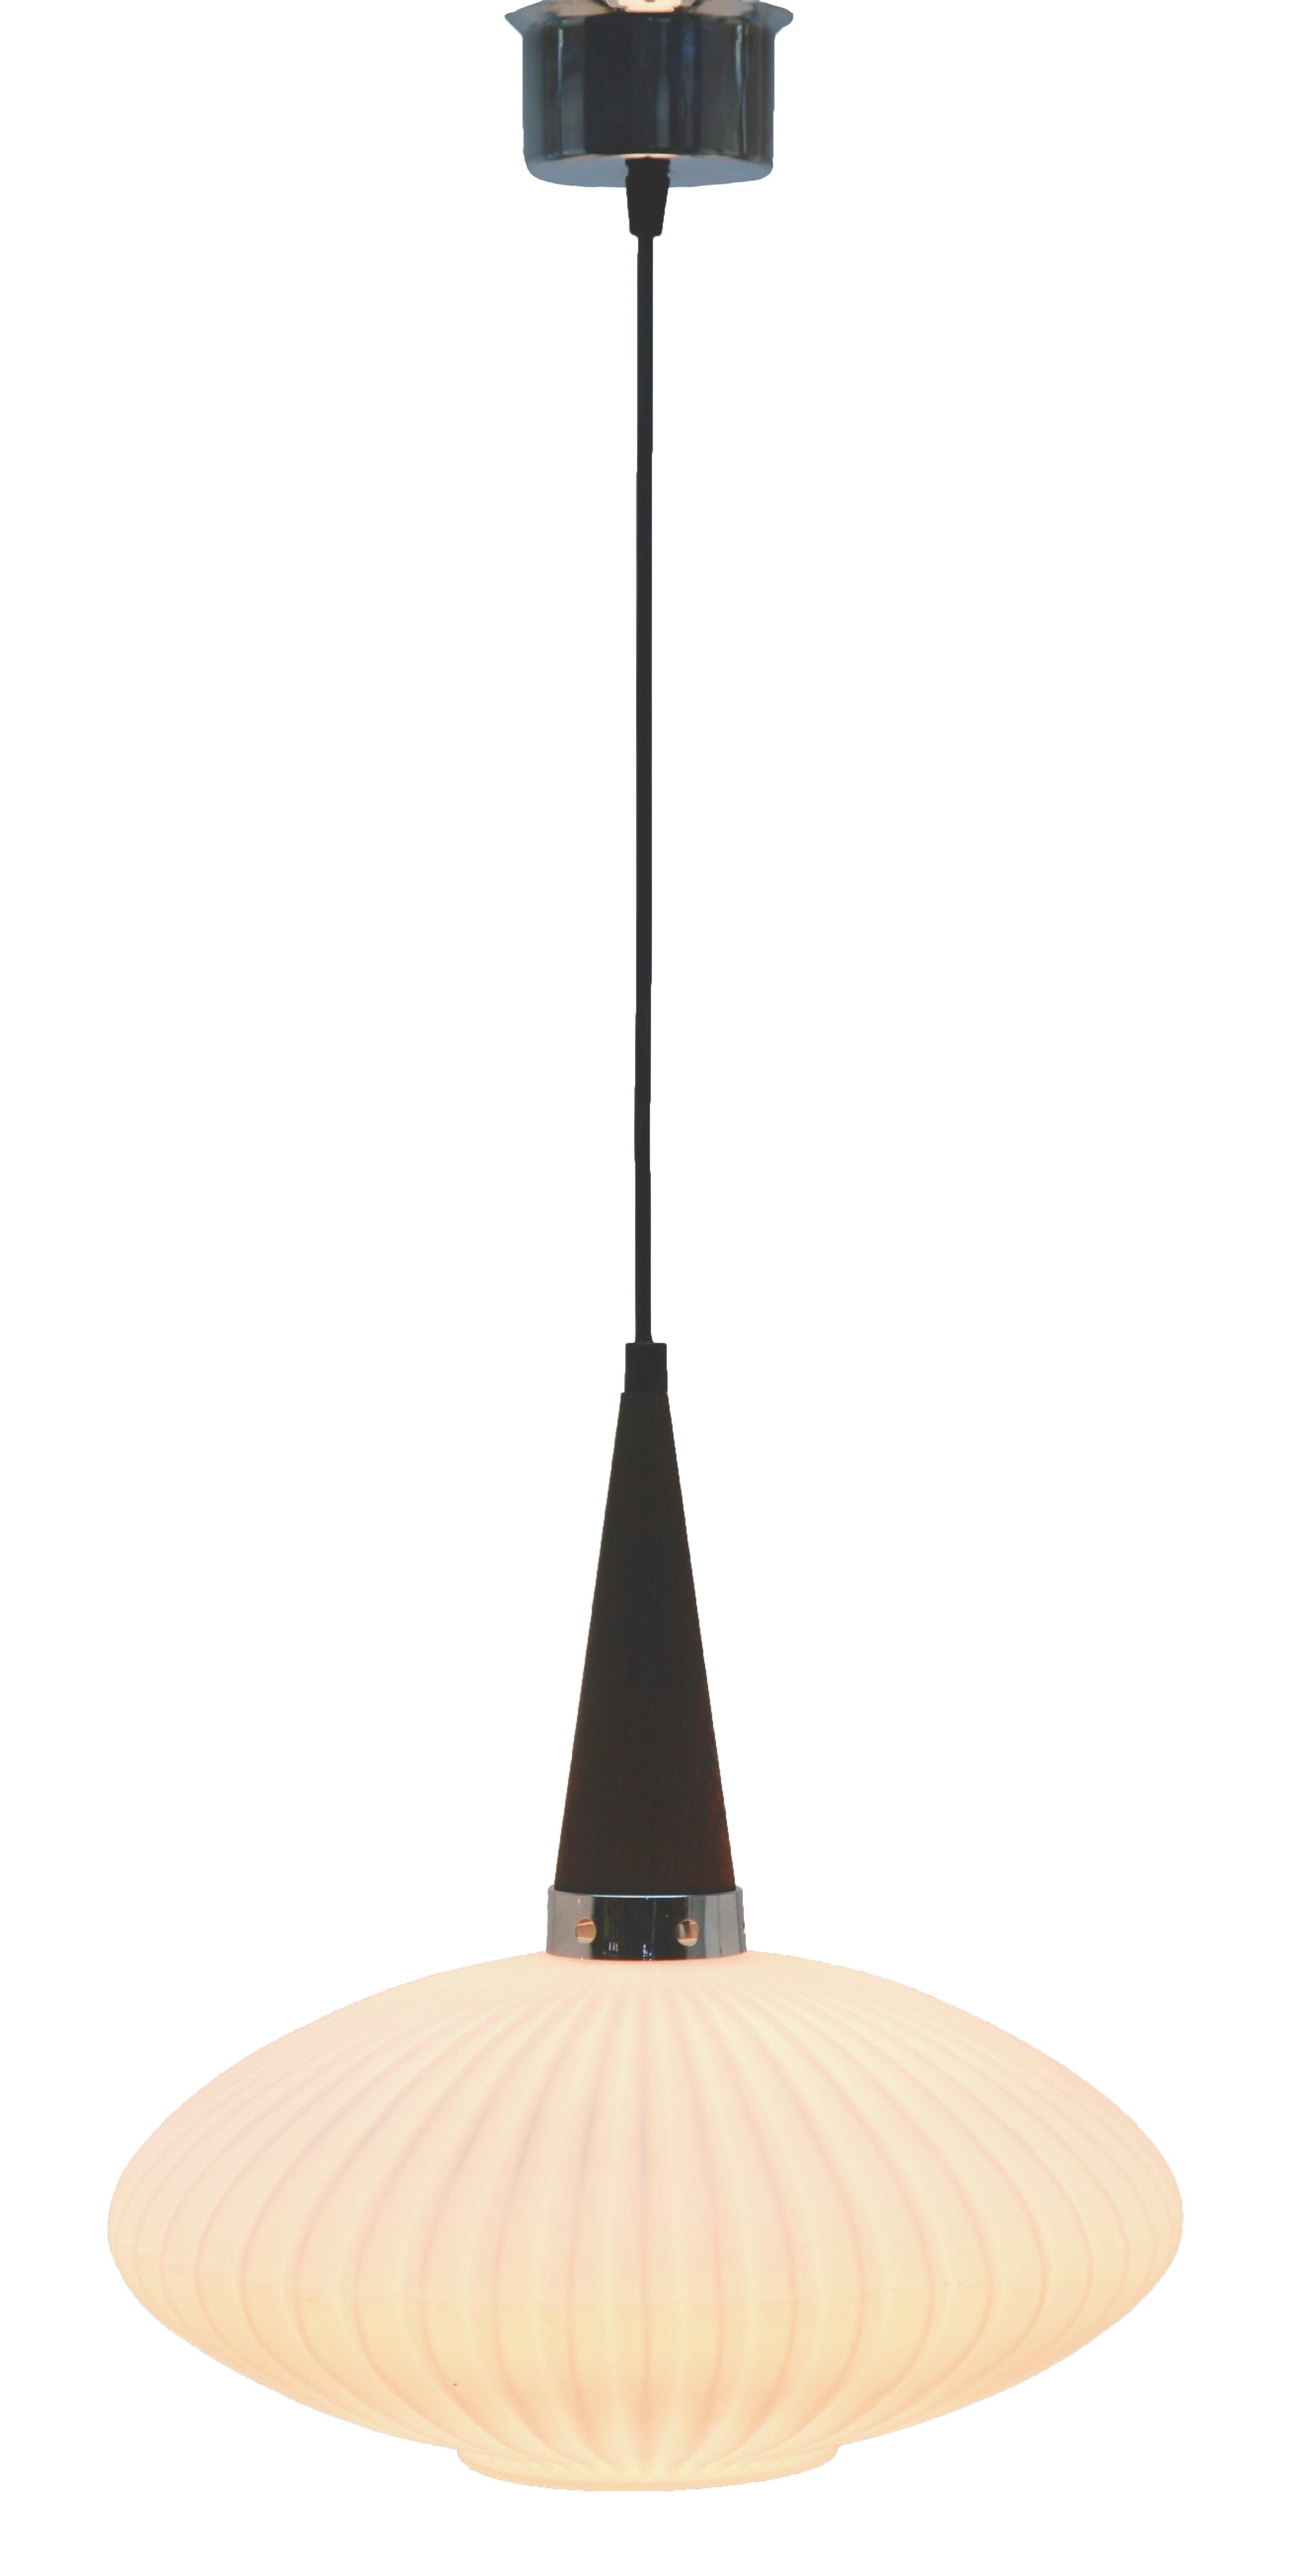 Hanging pendant light from the late 1960s on an adjustable cable, designed in the Scandinavian style with Wenge wood and an opaline shade. Its Classic modernist form and simplicity in design, make it an iconic example of midcentury home